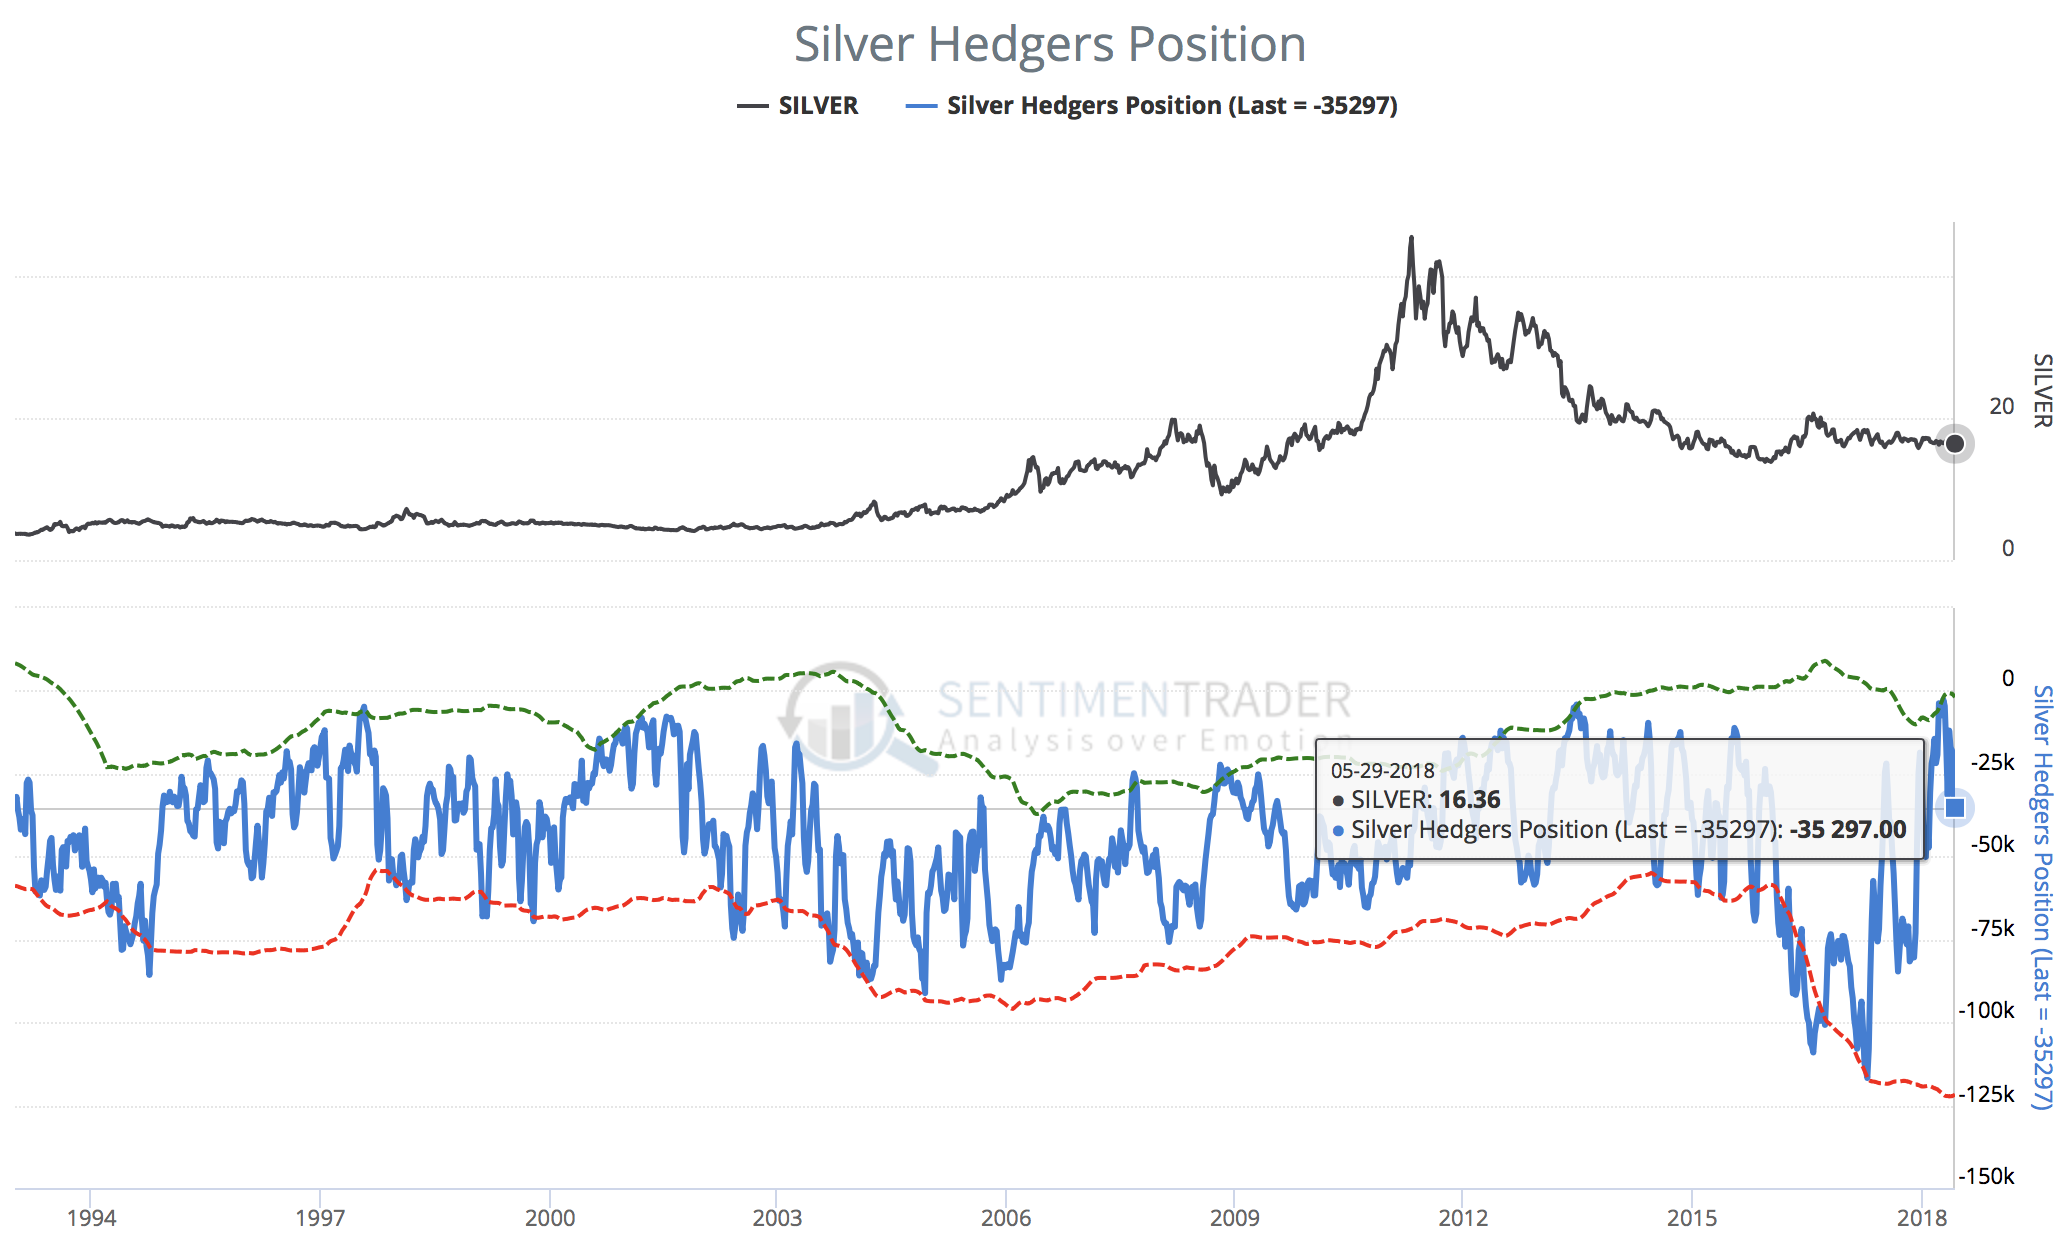 Silver hedgers position as of May 29th 2018